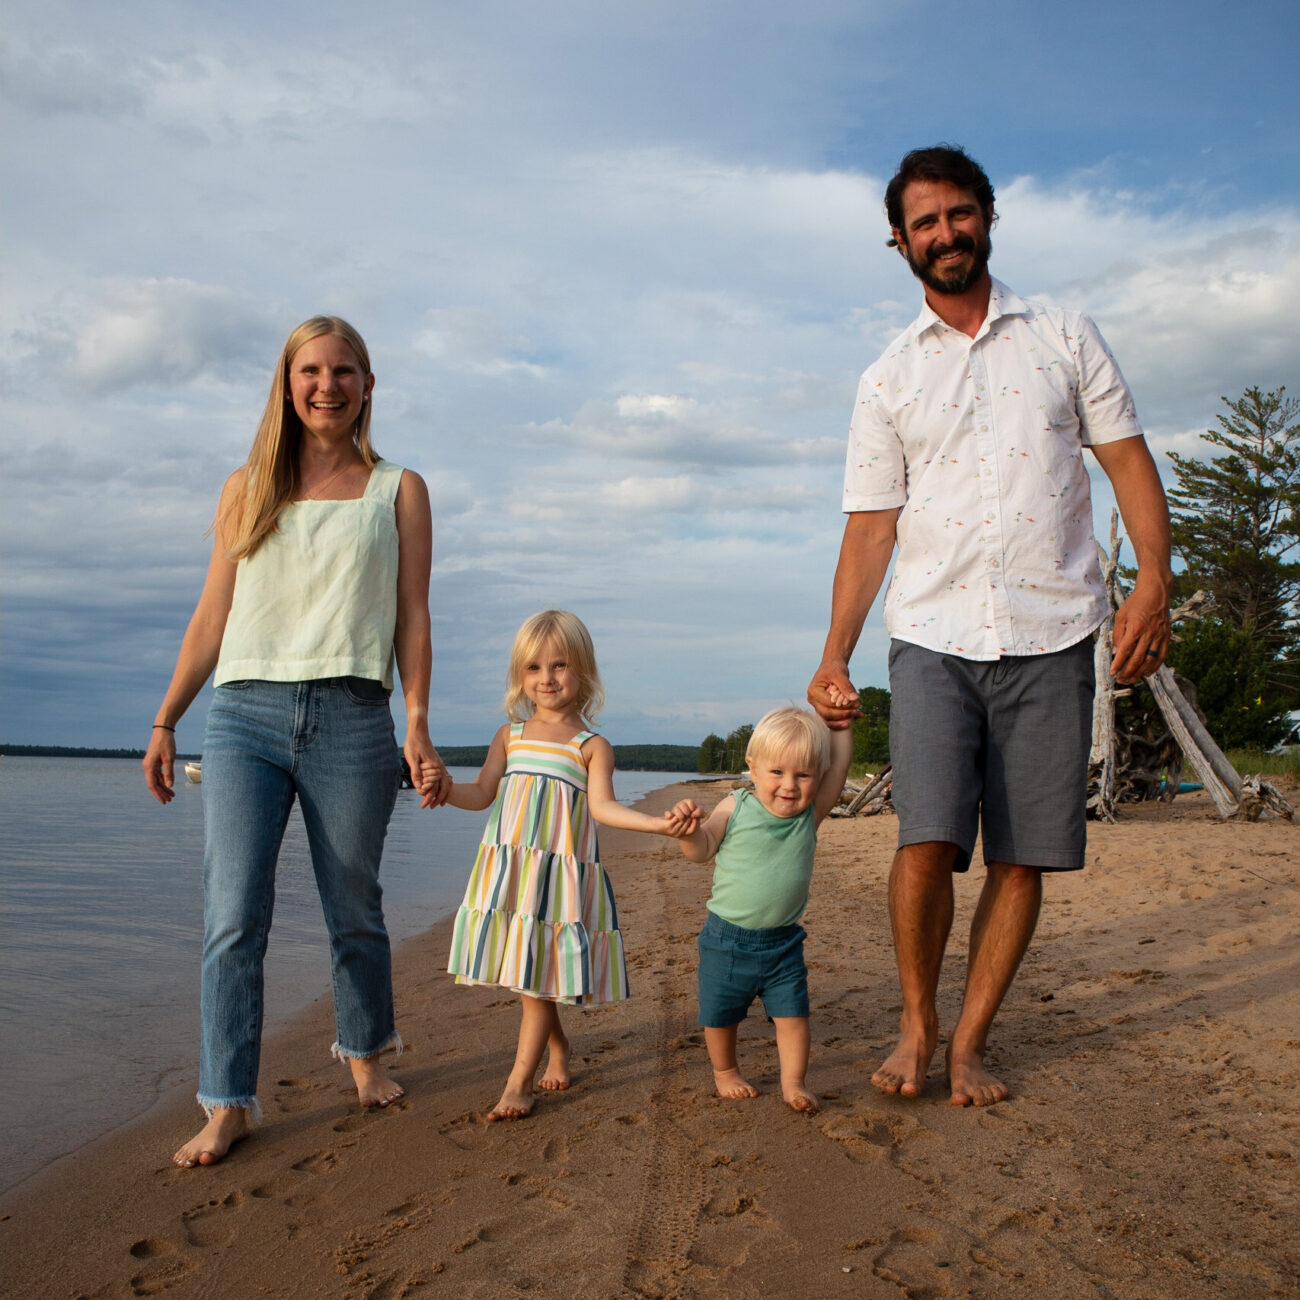 Alison Percowycz, MSN, FNP-C with her husband and two children smiling on a beach